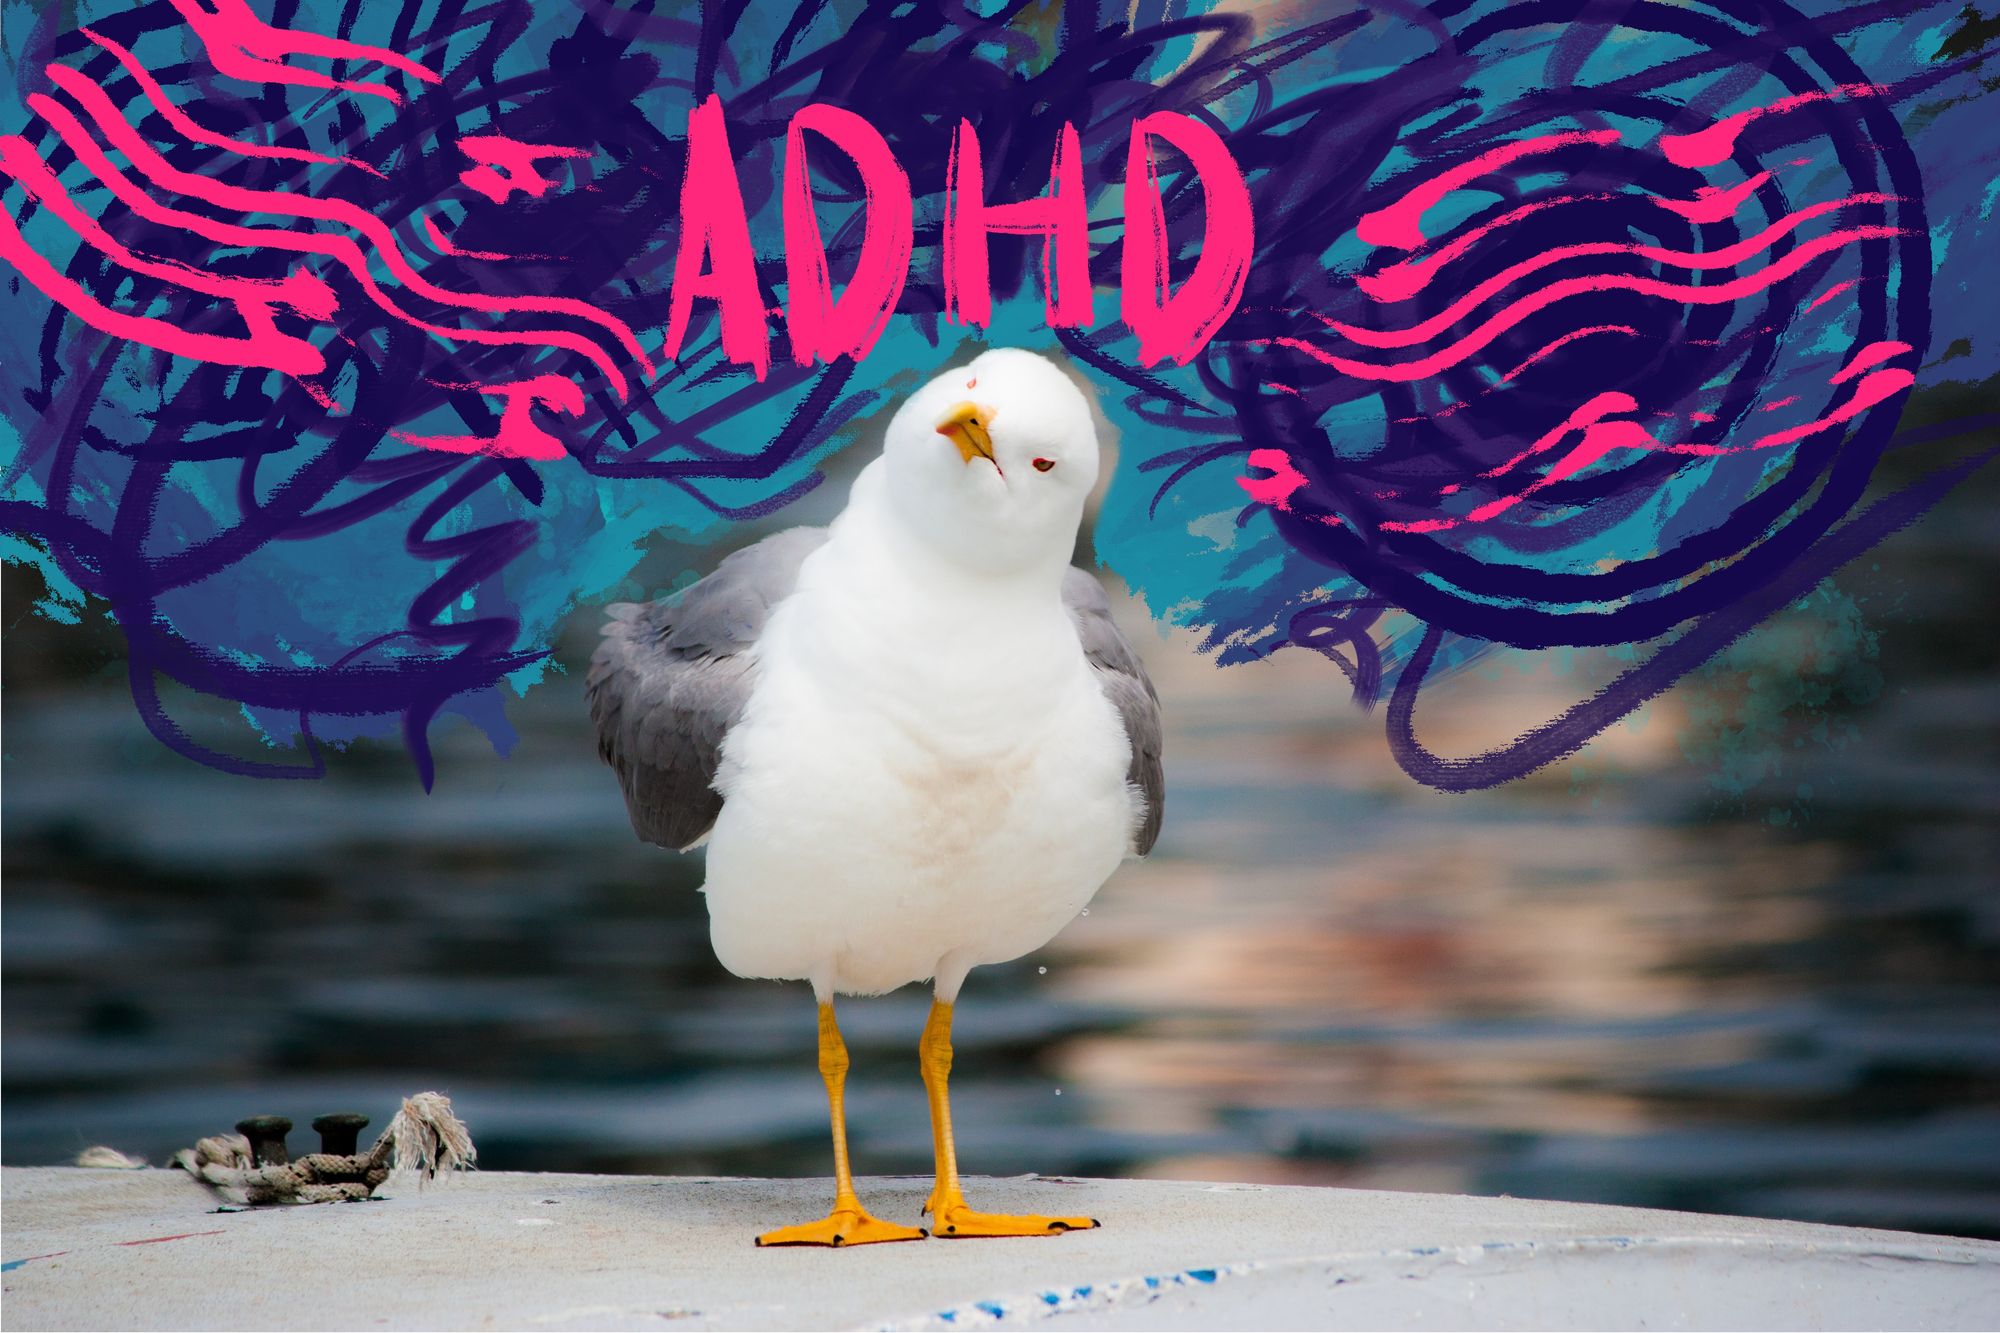 My most helpful strategies for mastering ADHD